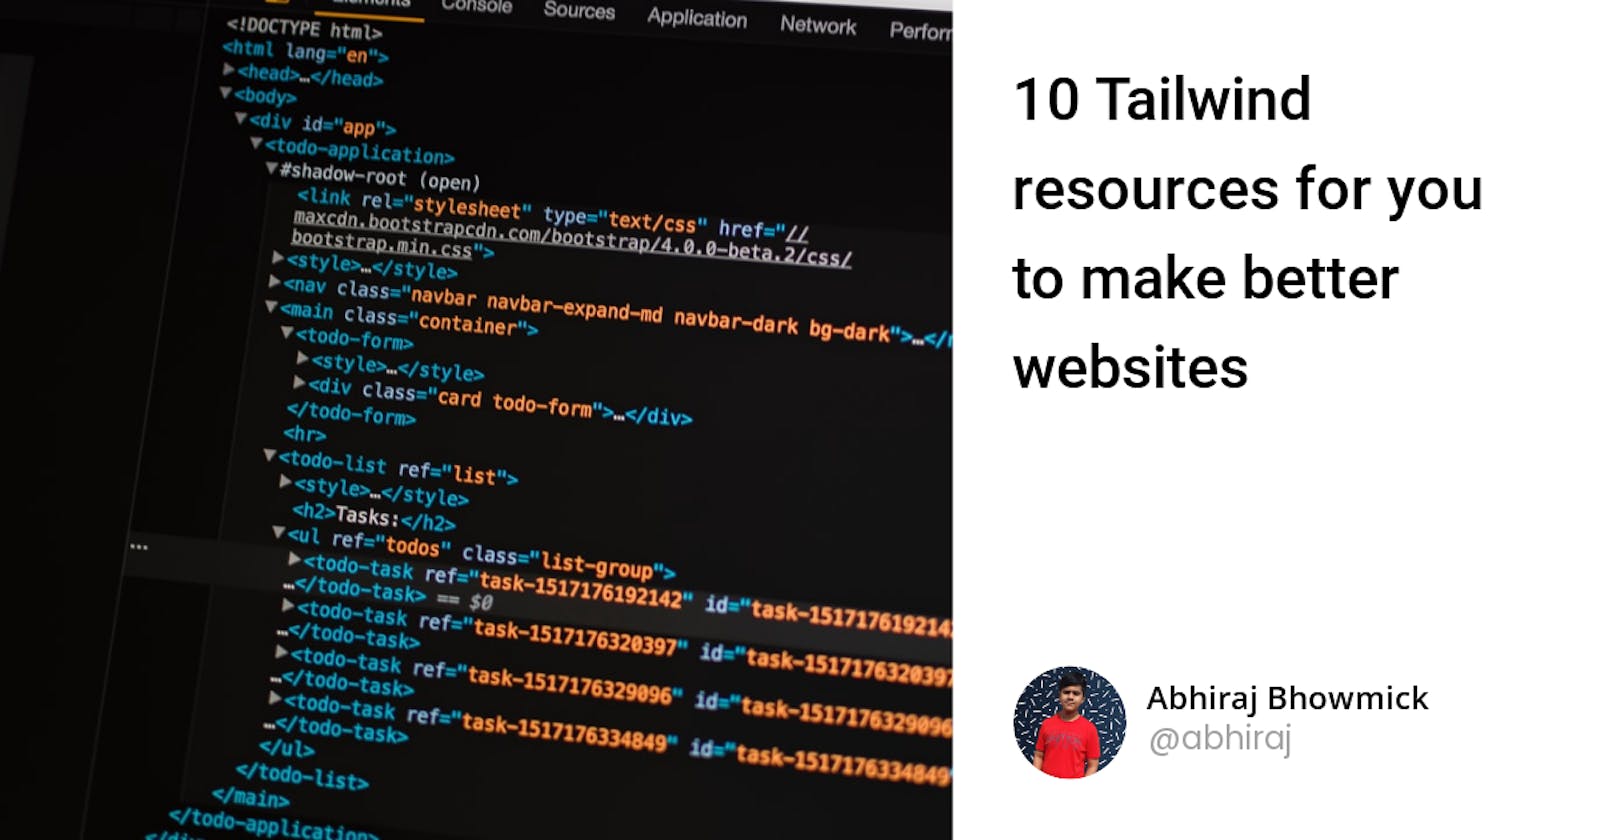 10 Tailwind resources for you to make better websites